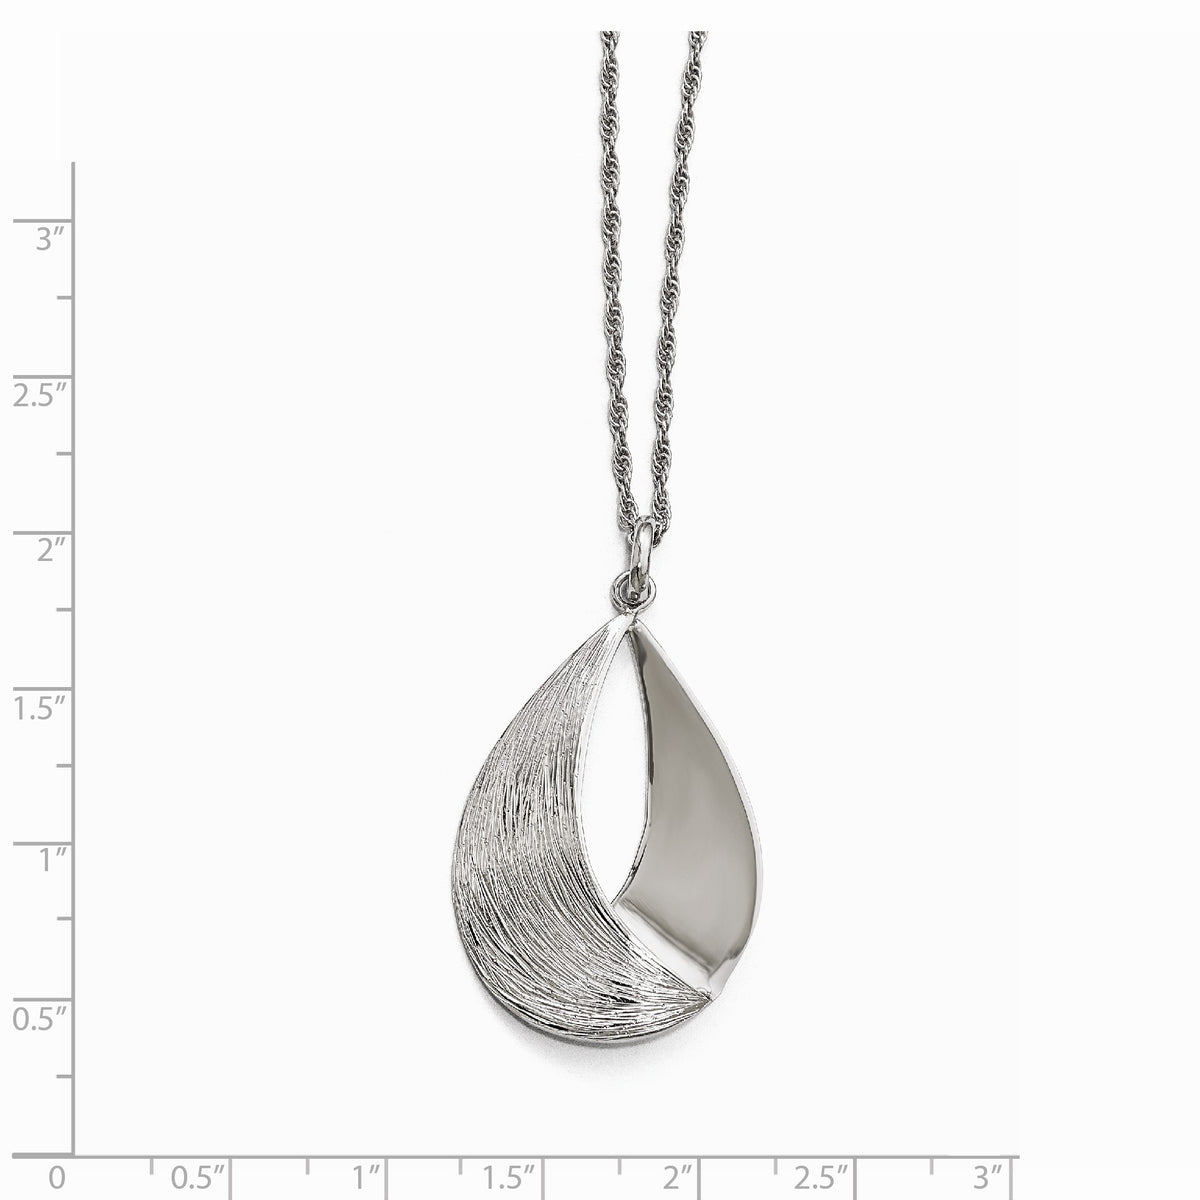 Alternate view of the Sterling Silver Polished and Textured Teardrop Pendant, 25 x 42mm by The Black Bow Jewelry Co.